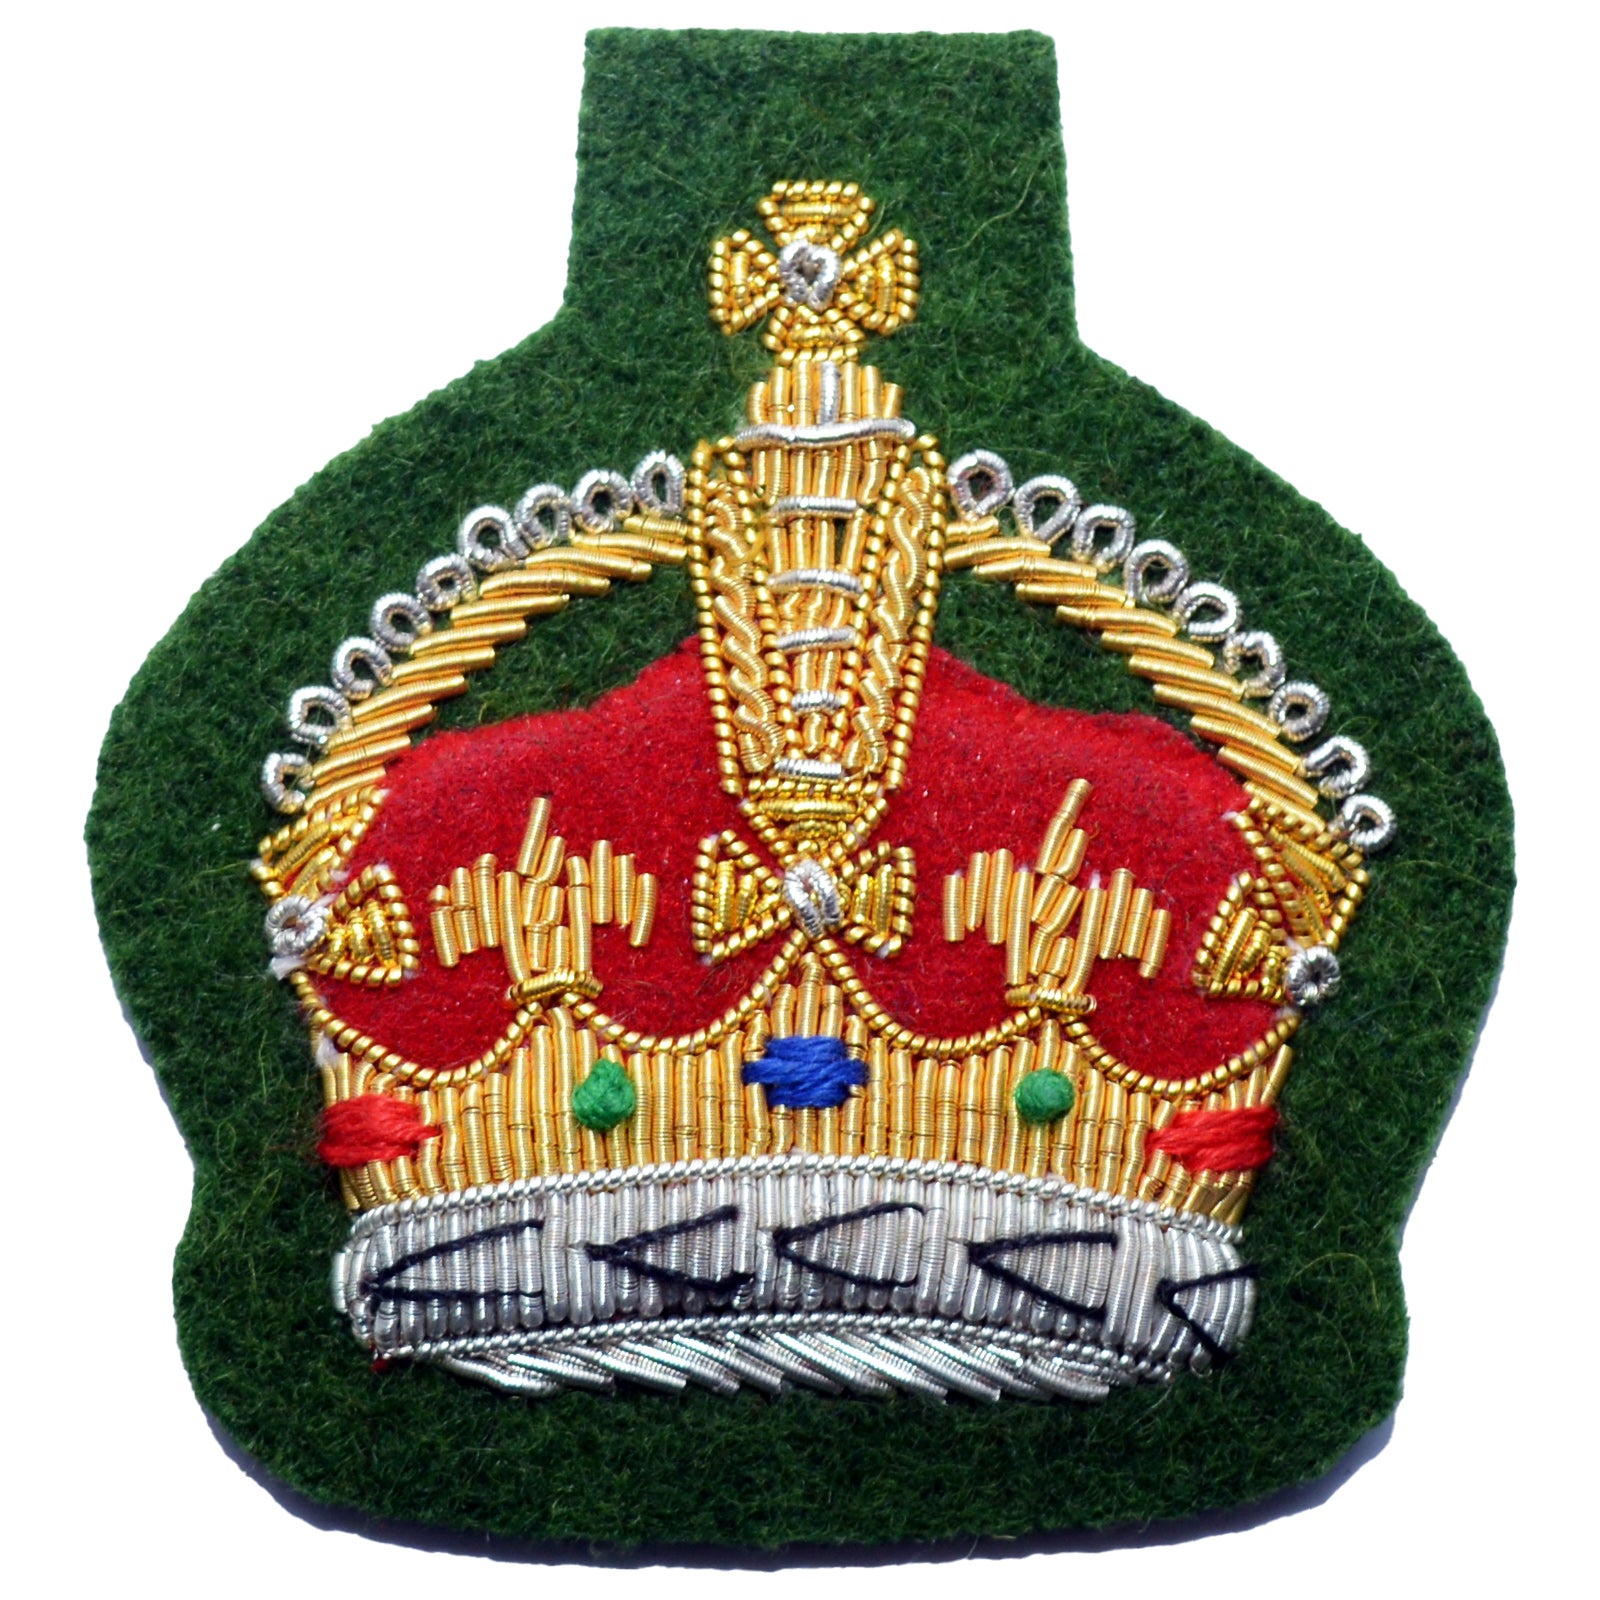 (King's Crown) Warrant Officer Class 2 (WO2) Intelligence Corps NCO British Army Rank Badge